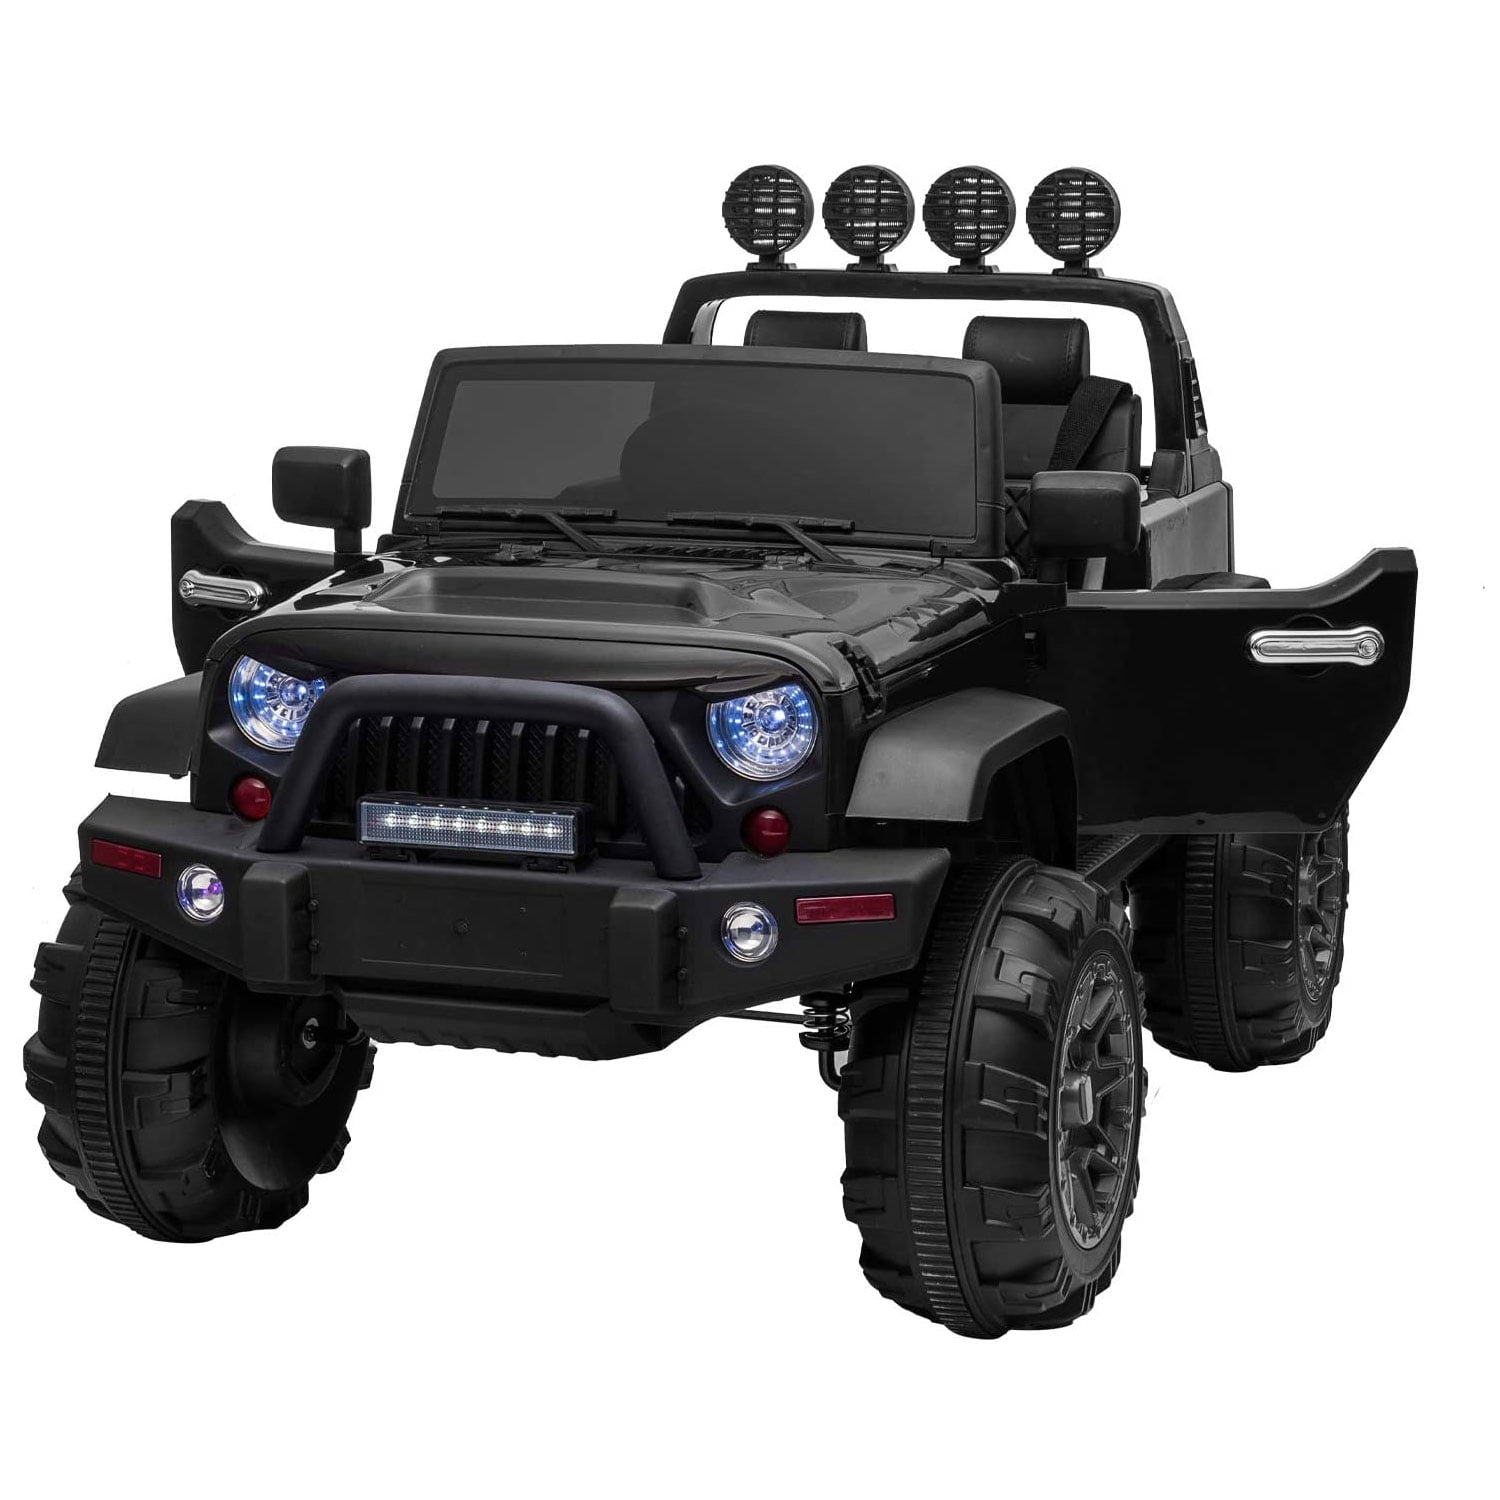 TOBBI 12V Electric Battery-Powered Ride On Jeep Wrangler Toy Vehicle, Black  